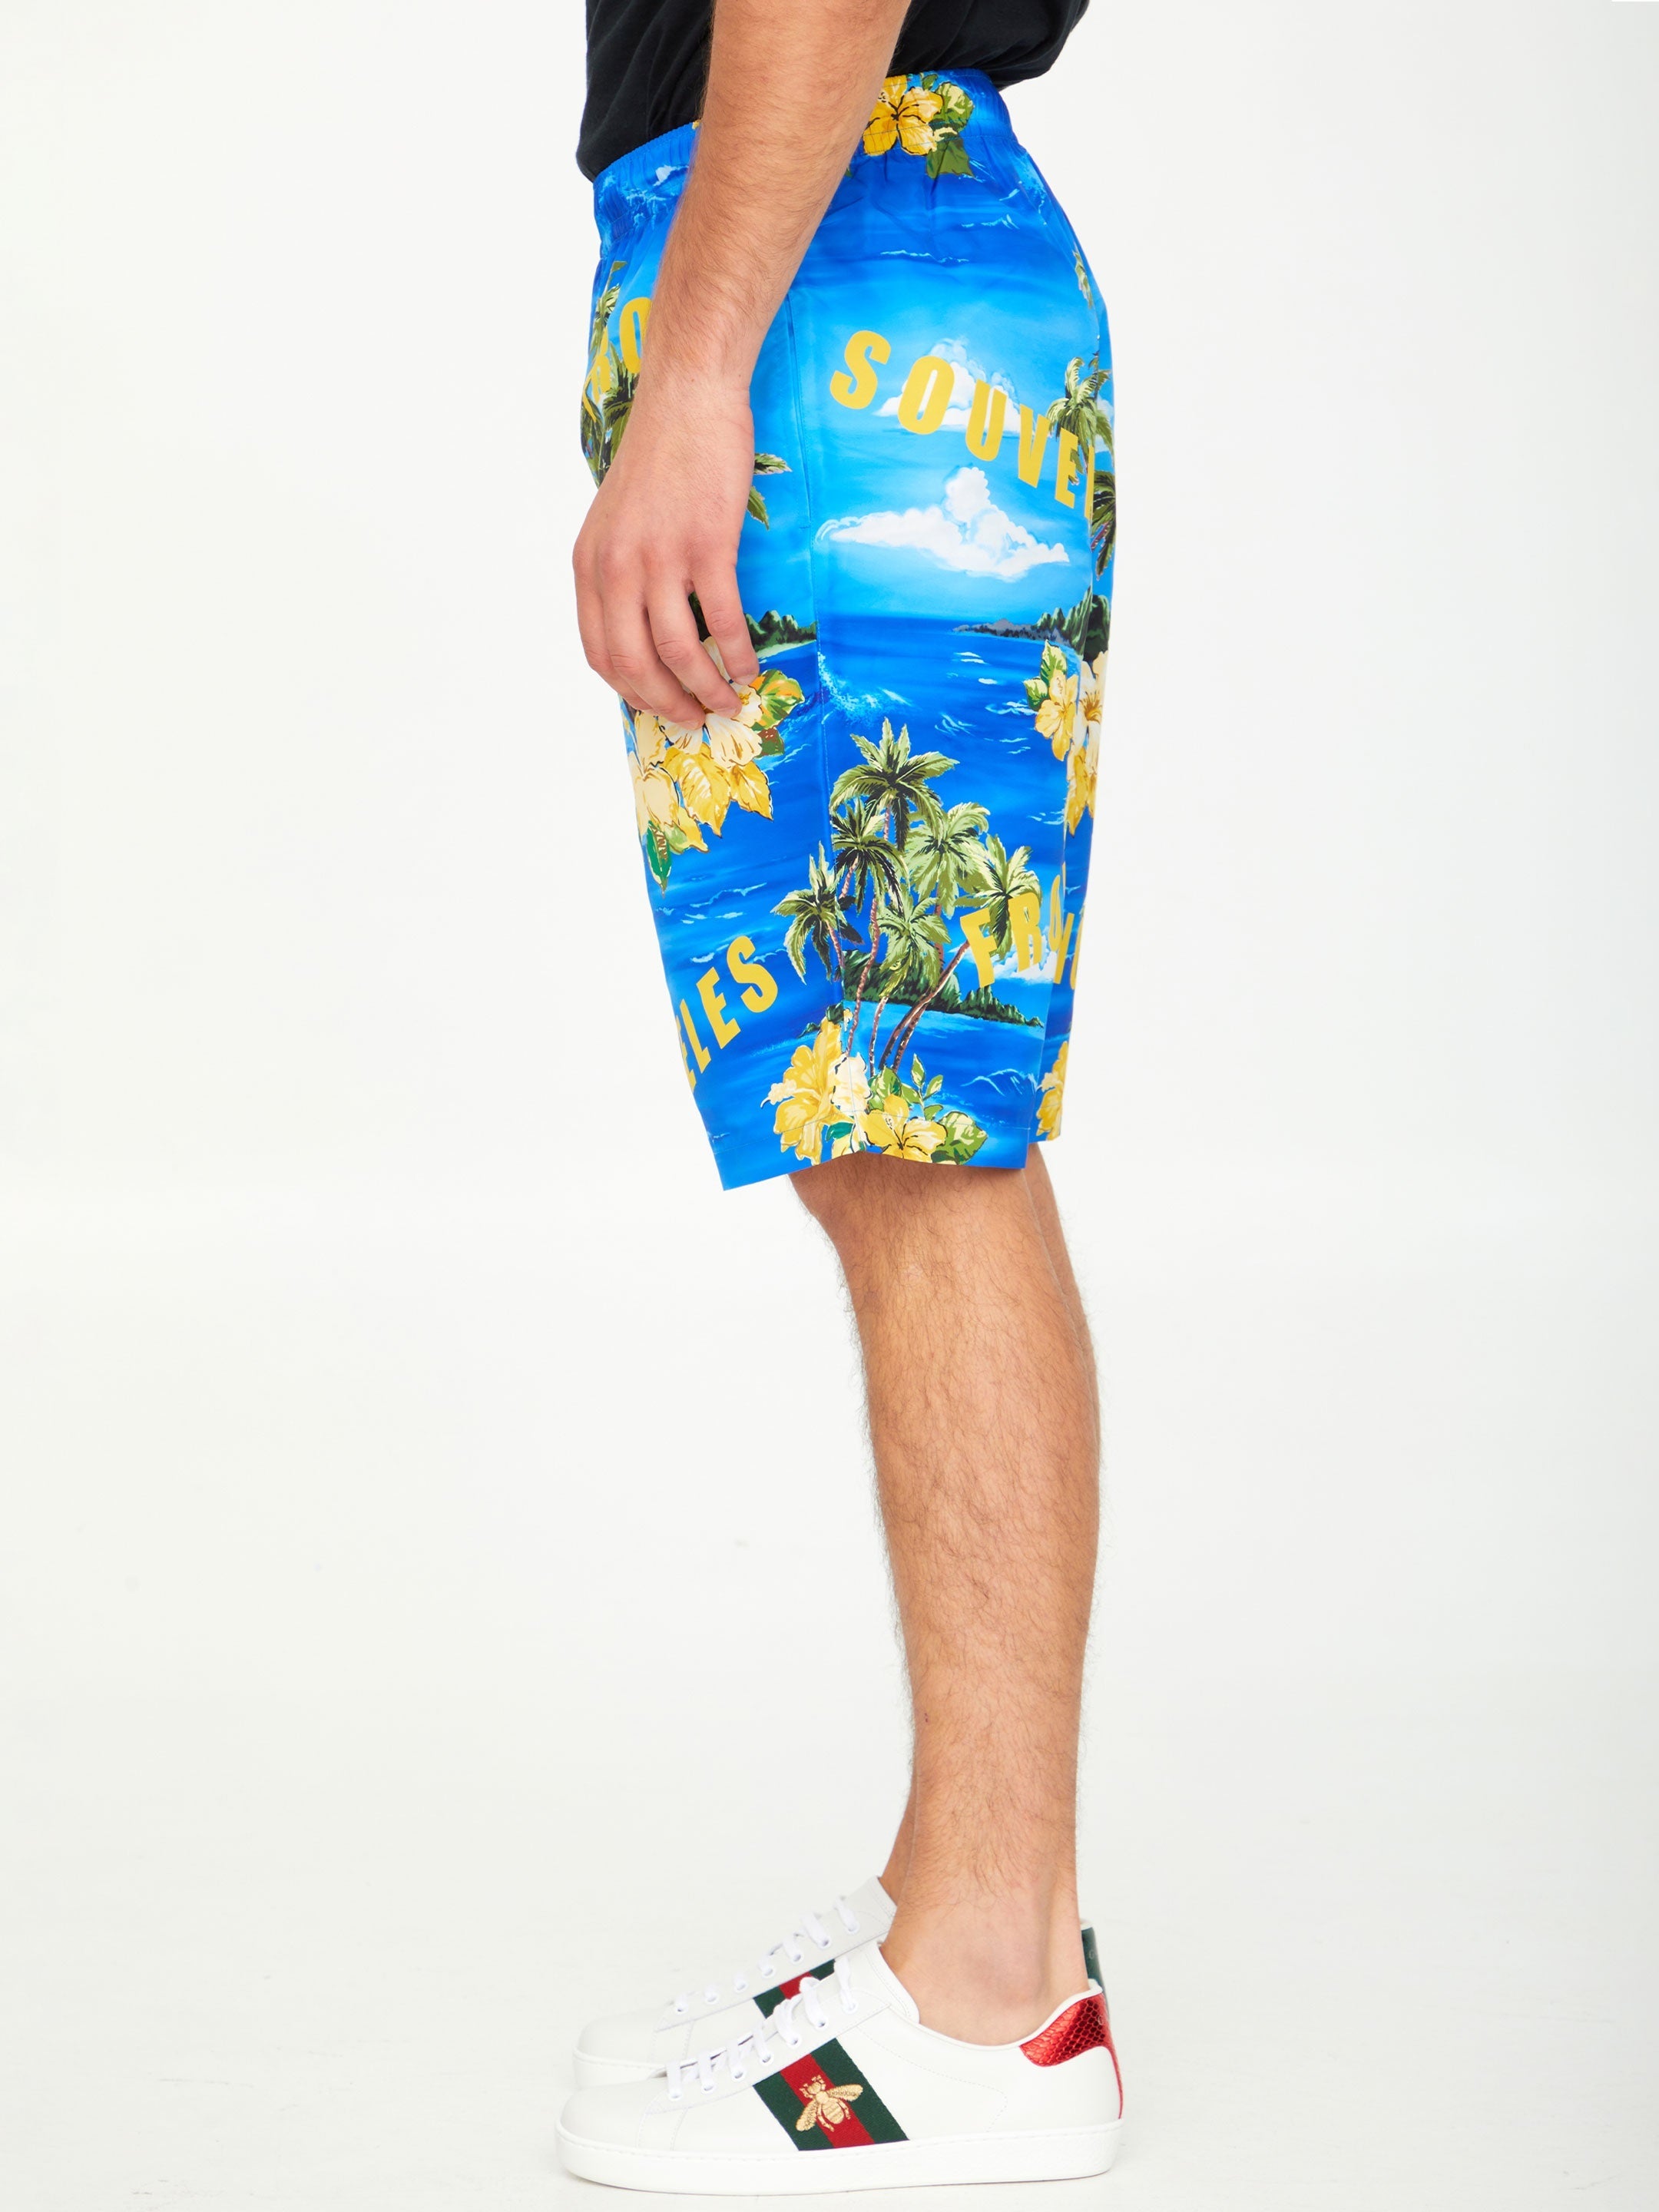 GUCCI-OUTLET-SALE-Printed-nylon-swim-shorts-Hosen-48-BLUE-ARCHIVE-COLLECTION-3.jpg